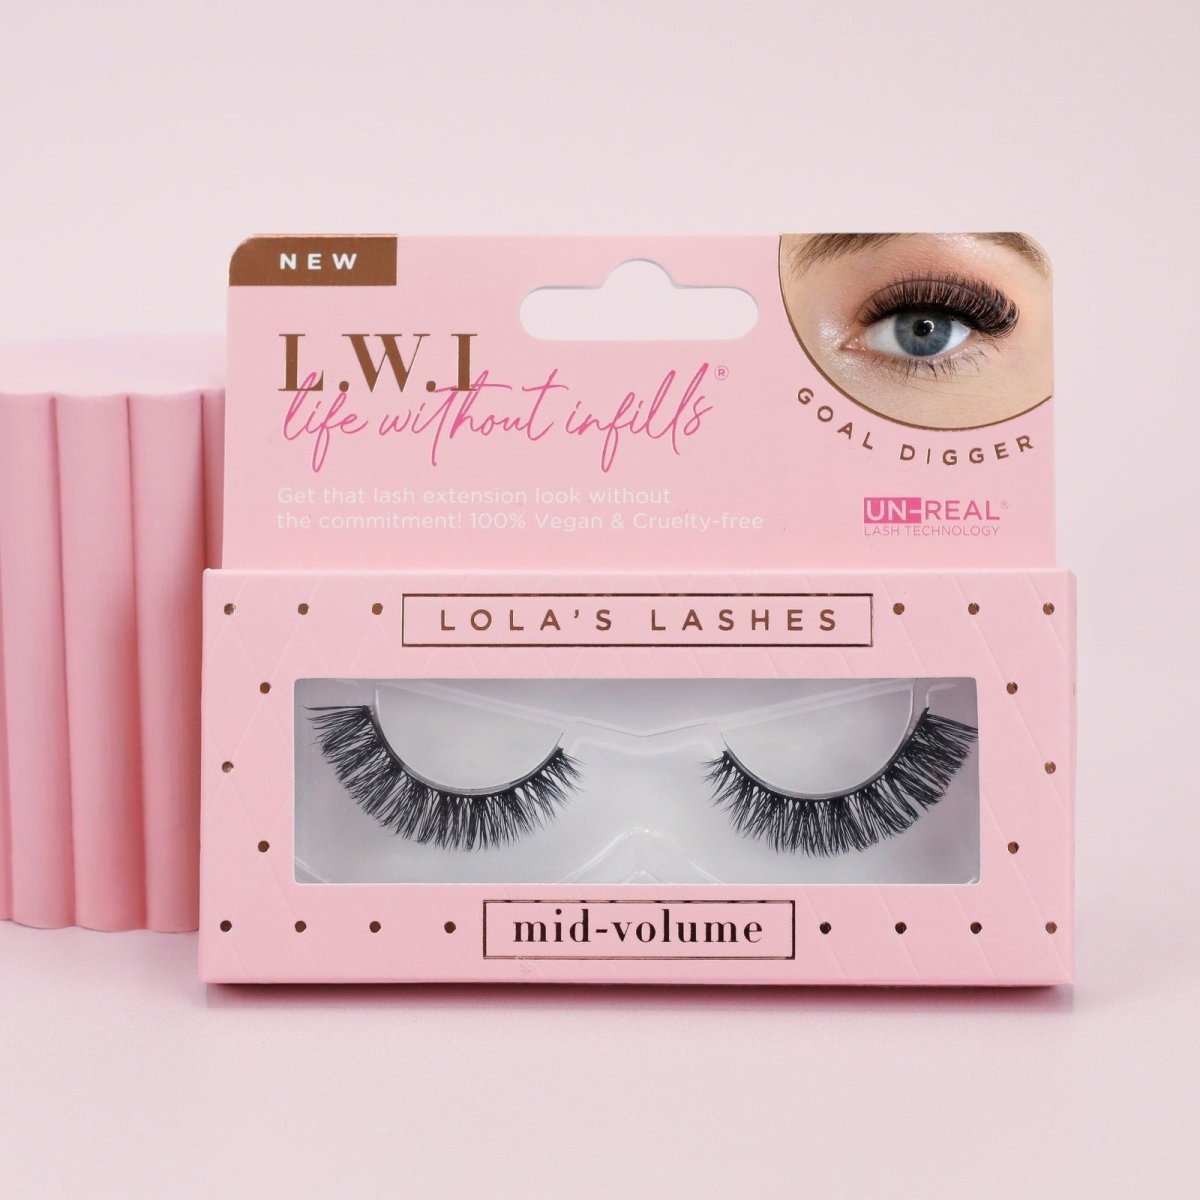 L.W.I Goal Digger Russian Strip Lashes - Lola's Lashes